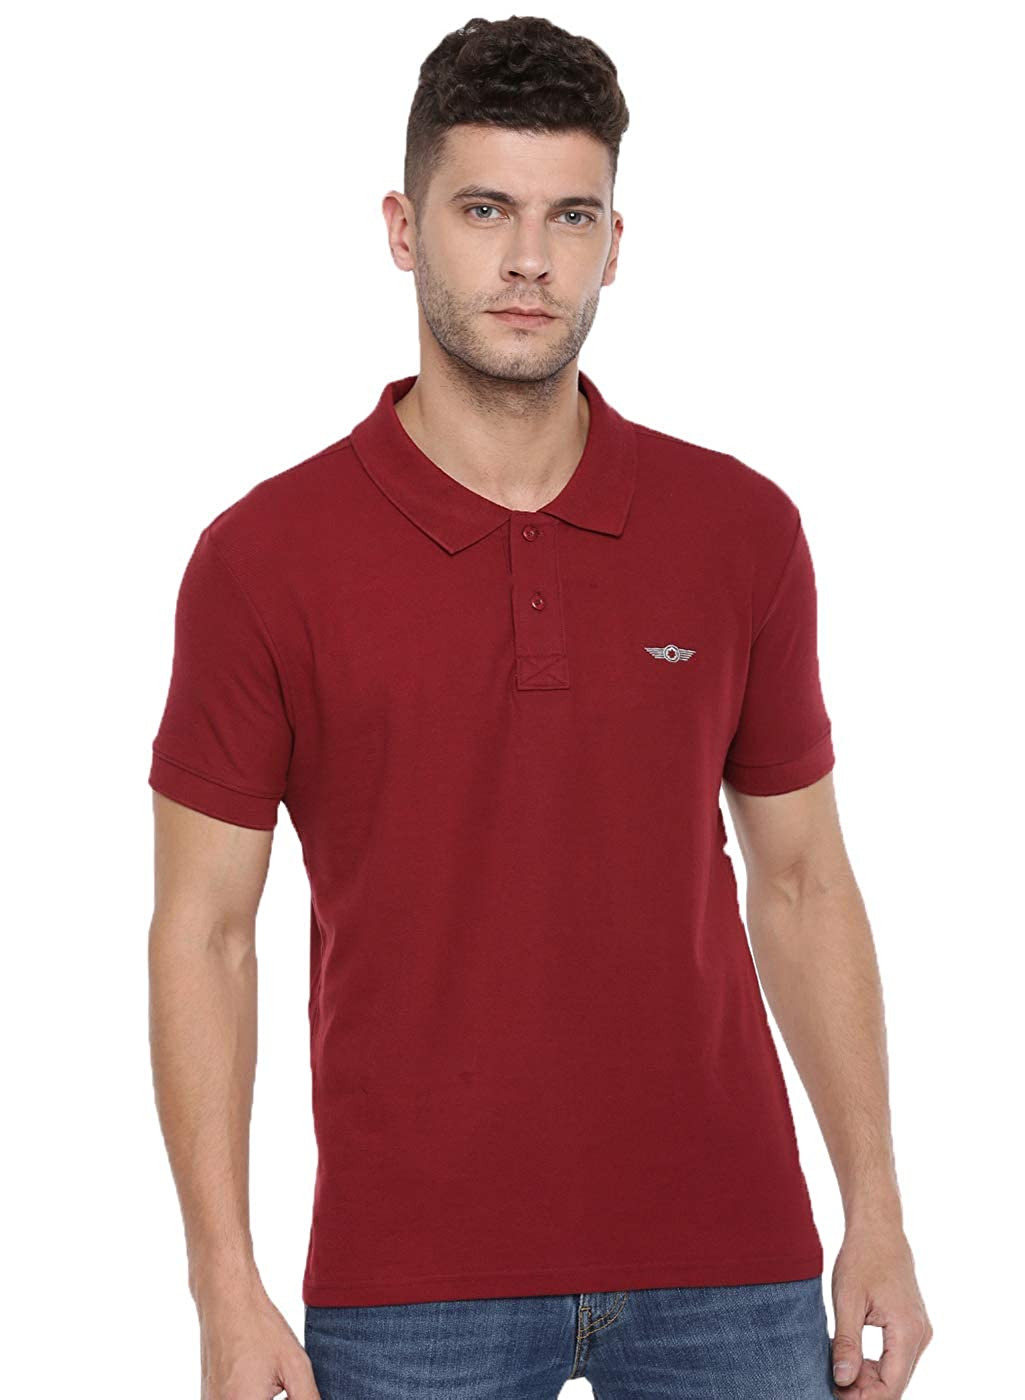 Maroon Slim Fit Polo Neck T-Shirt with collar for Men - Stilento